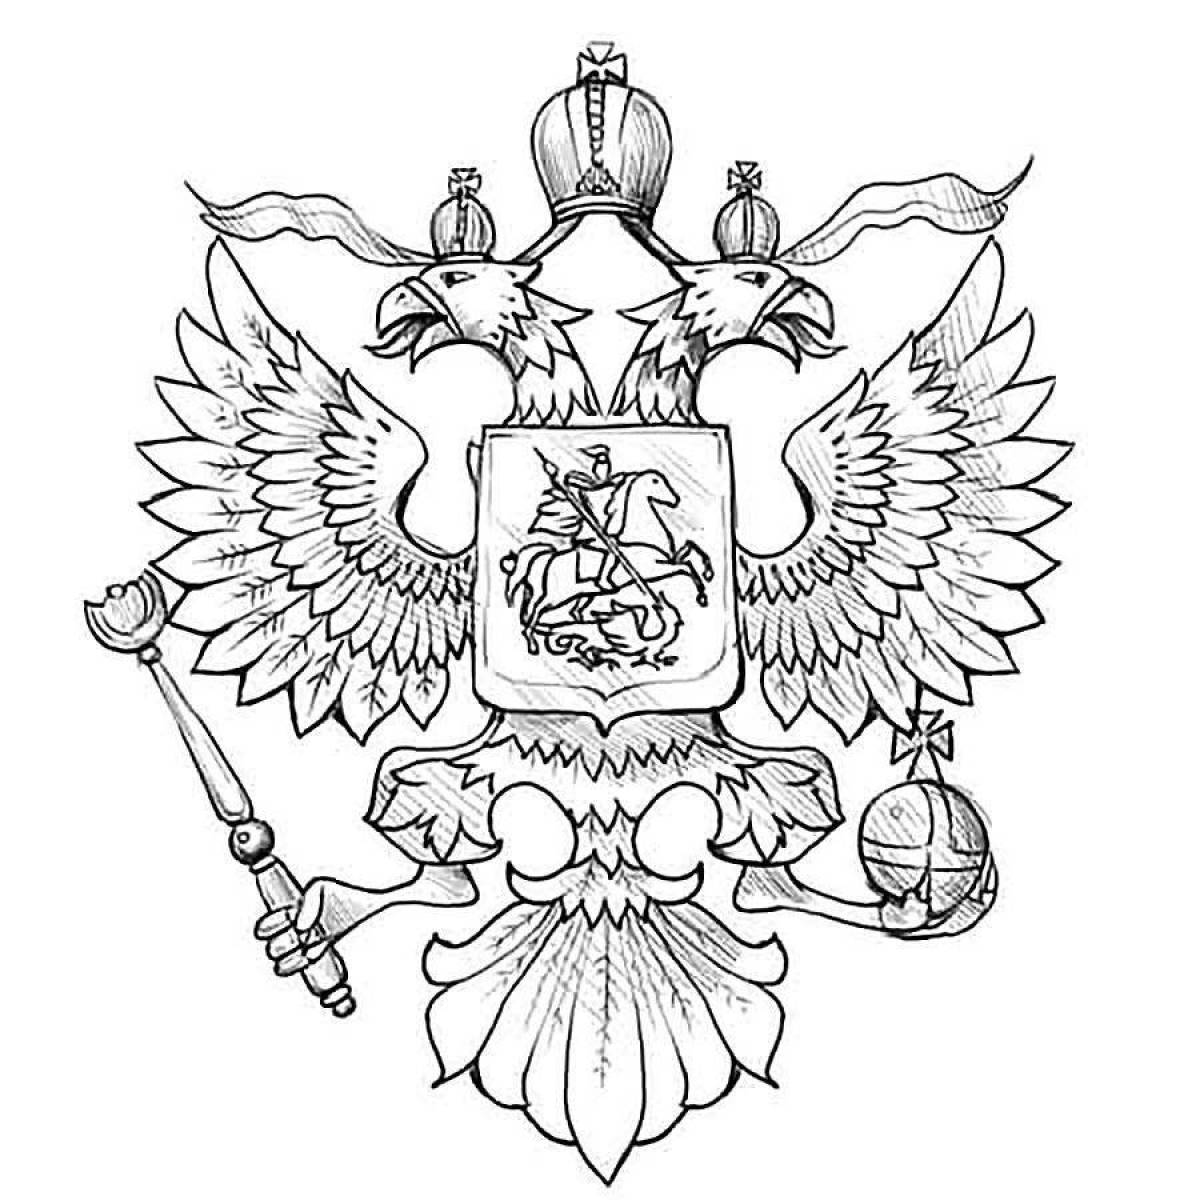 Colorful flag and coat of arms of russia